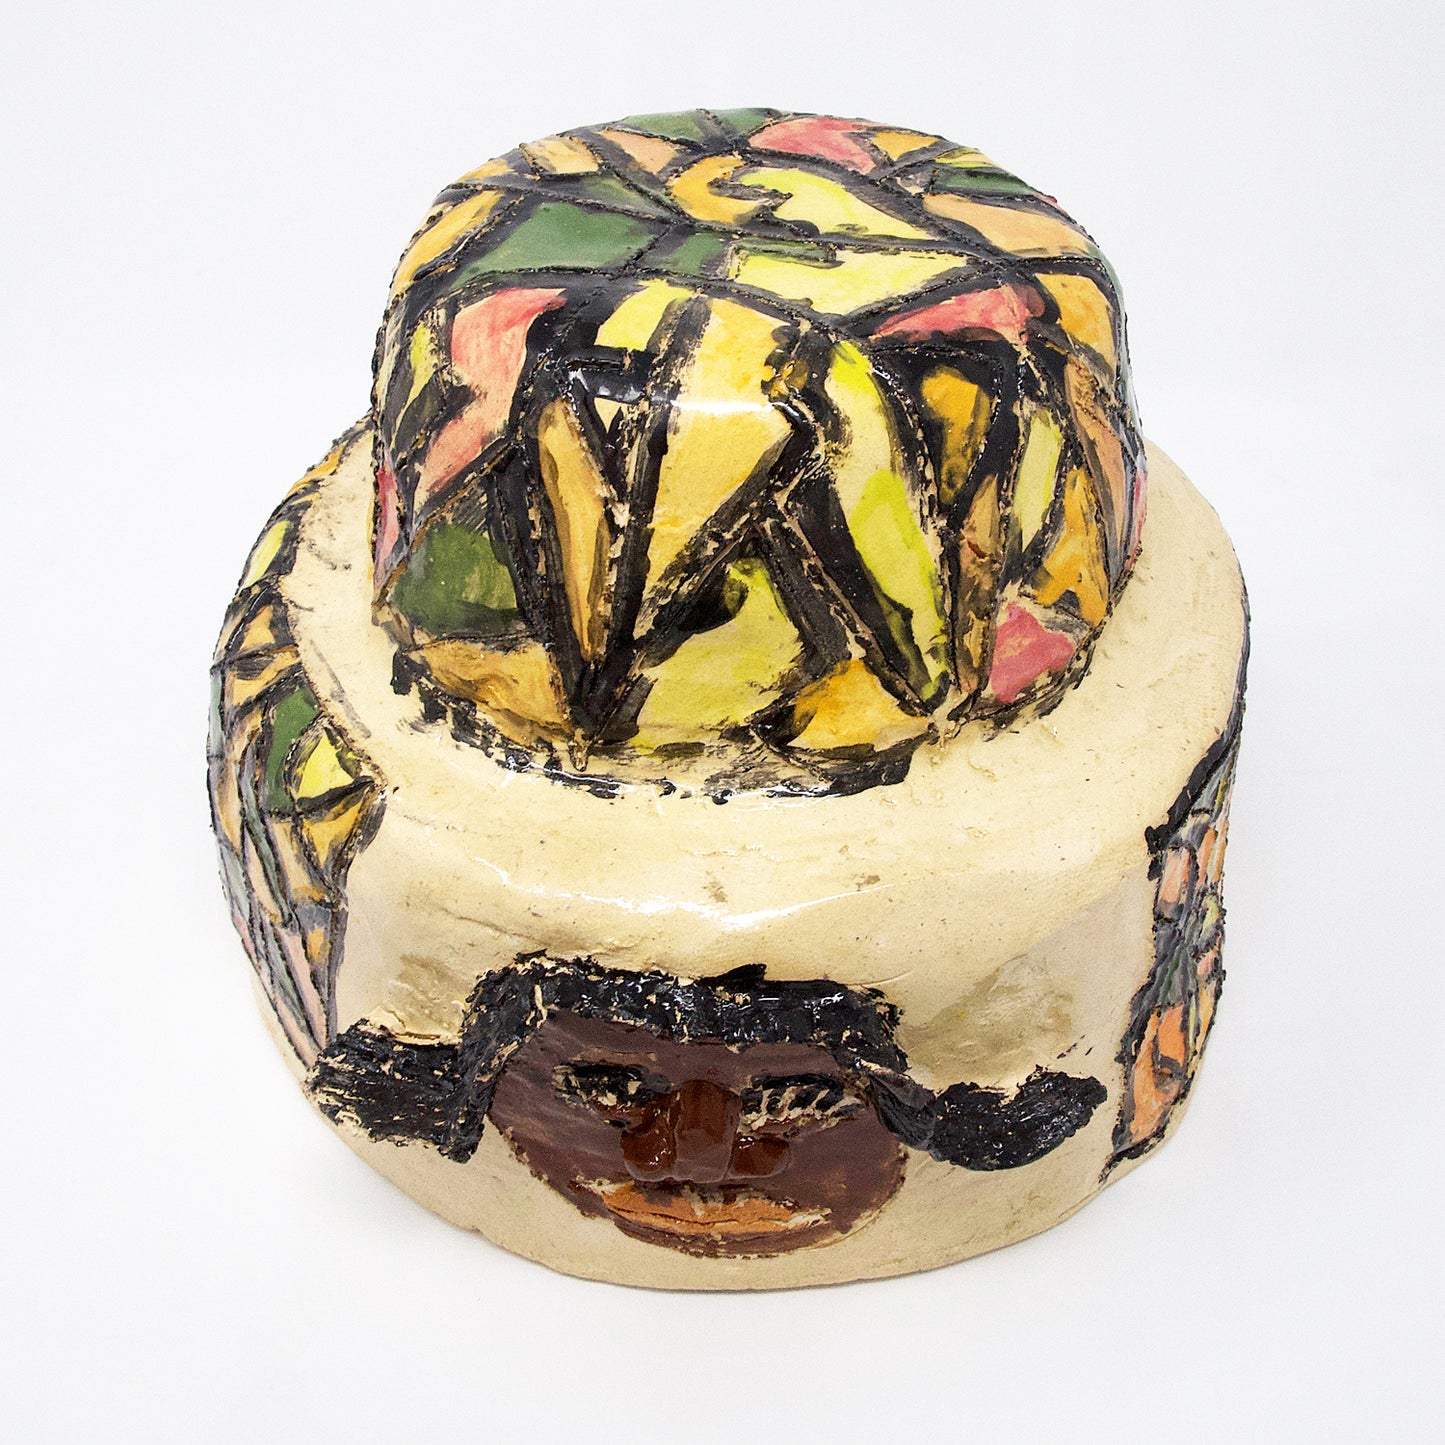 African Cake (S0634)